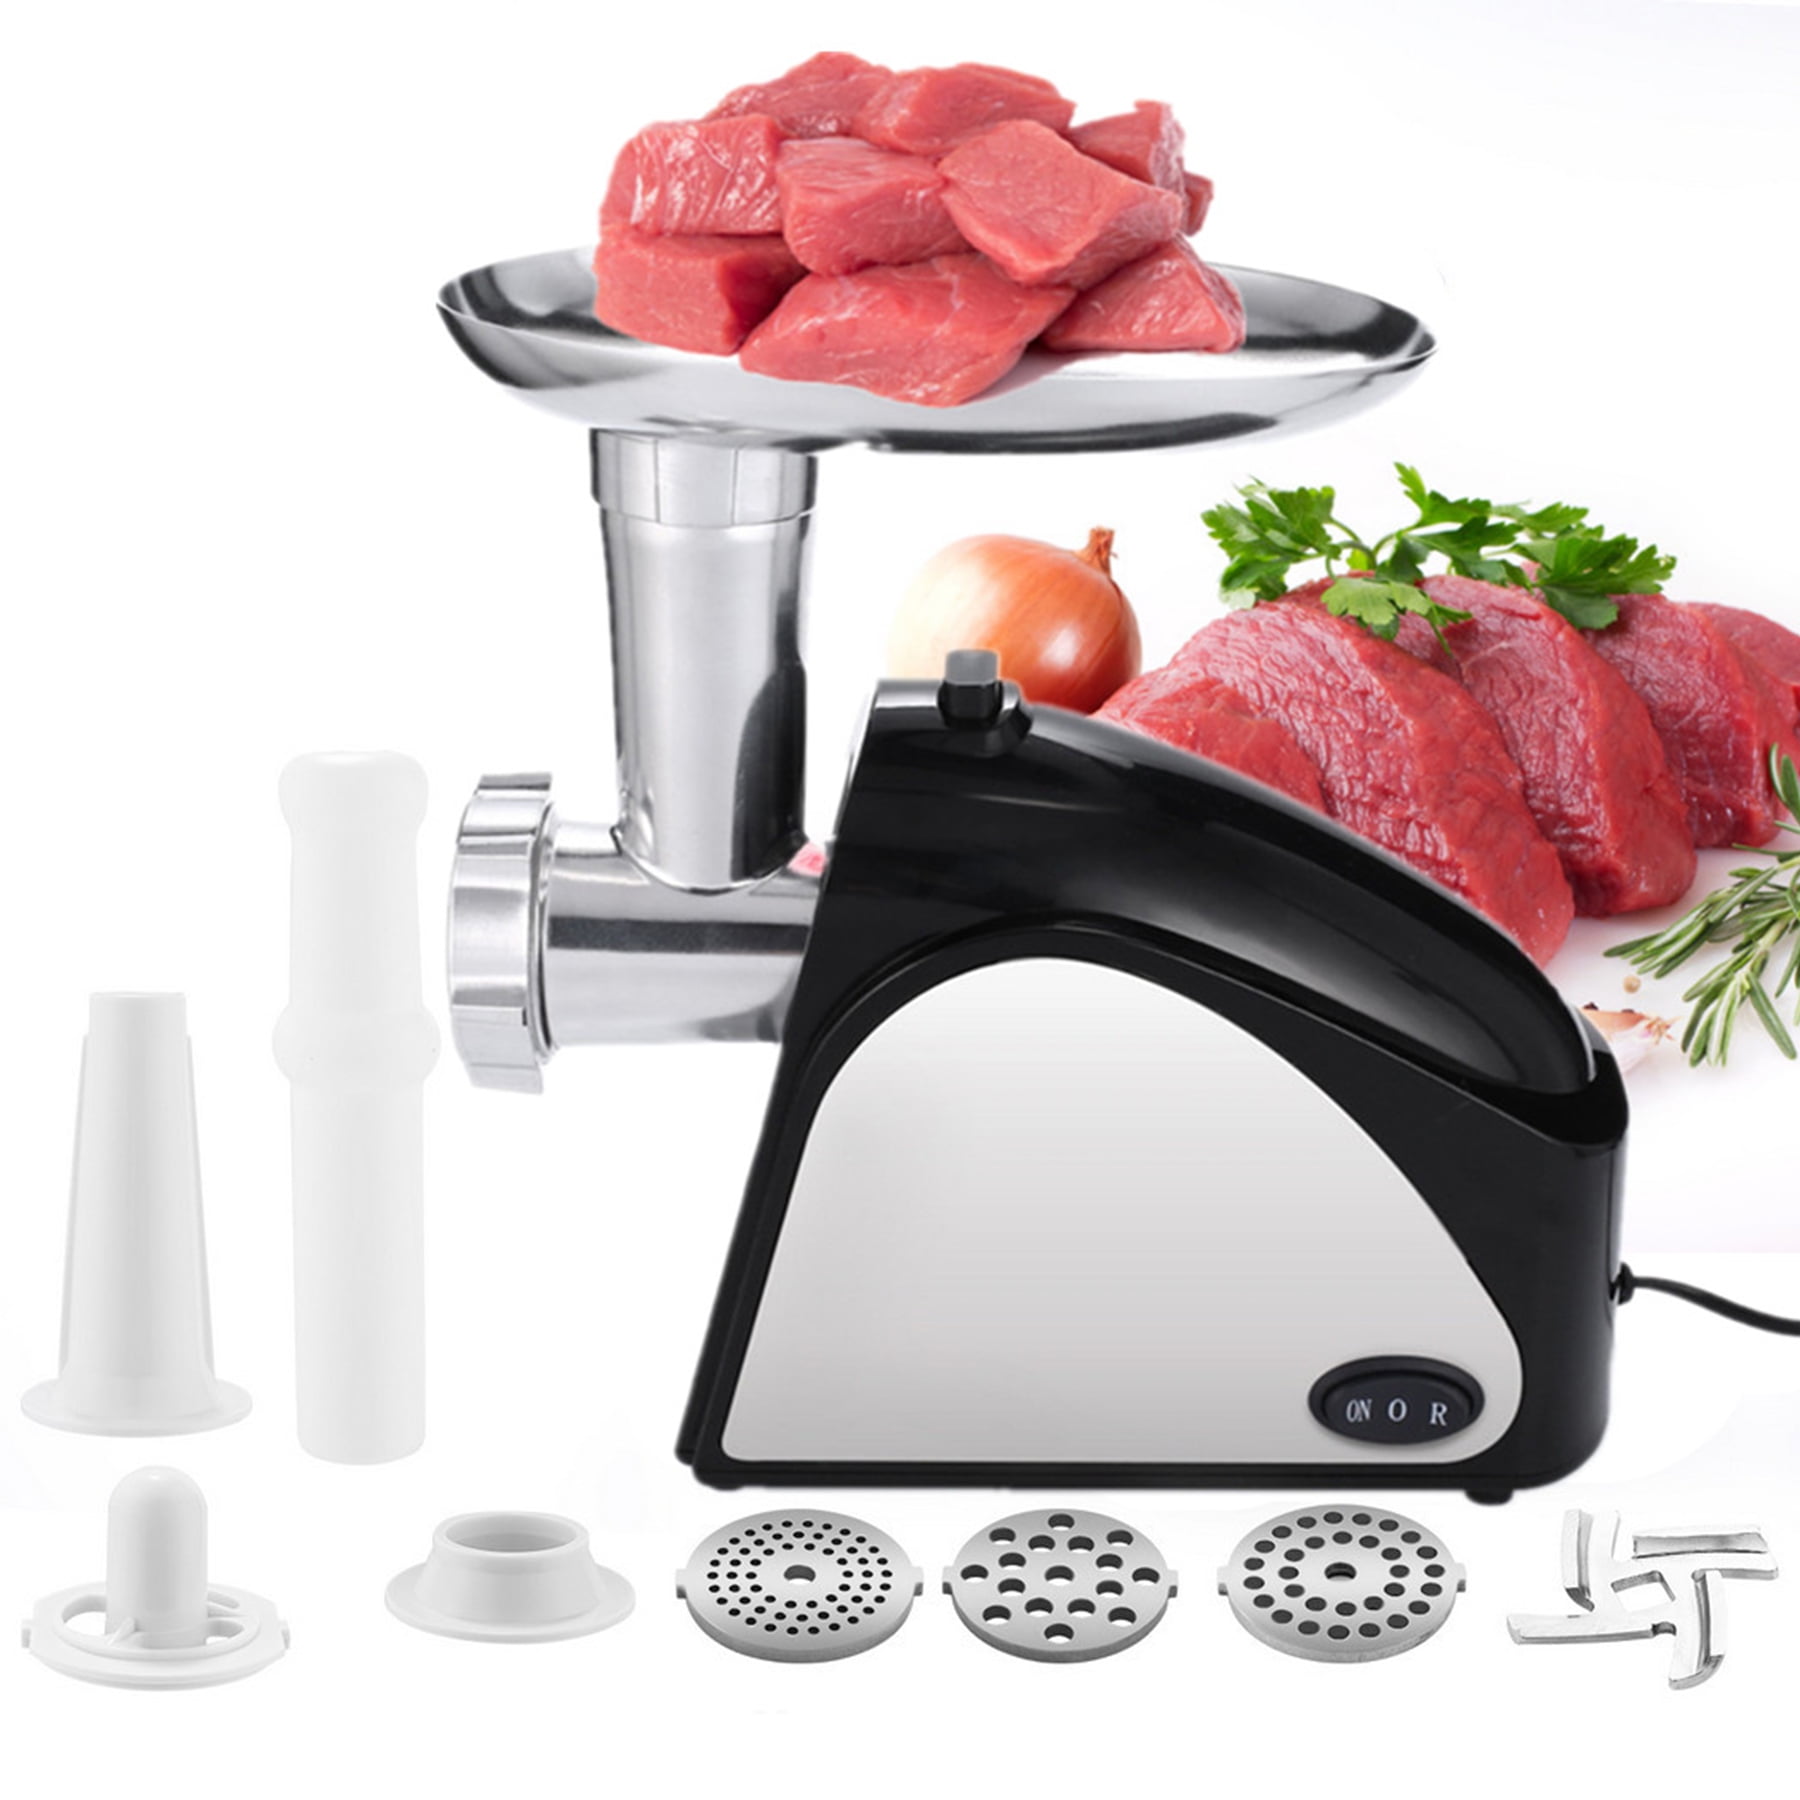 FUNKOL Number 3 Meat Grinder with Sausage Stuffer Kit 800W Power, Easy to Clean and Install, Suitable for Home Kitchen, Sliver